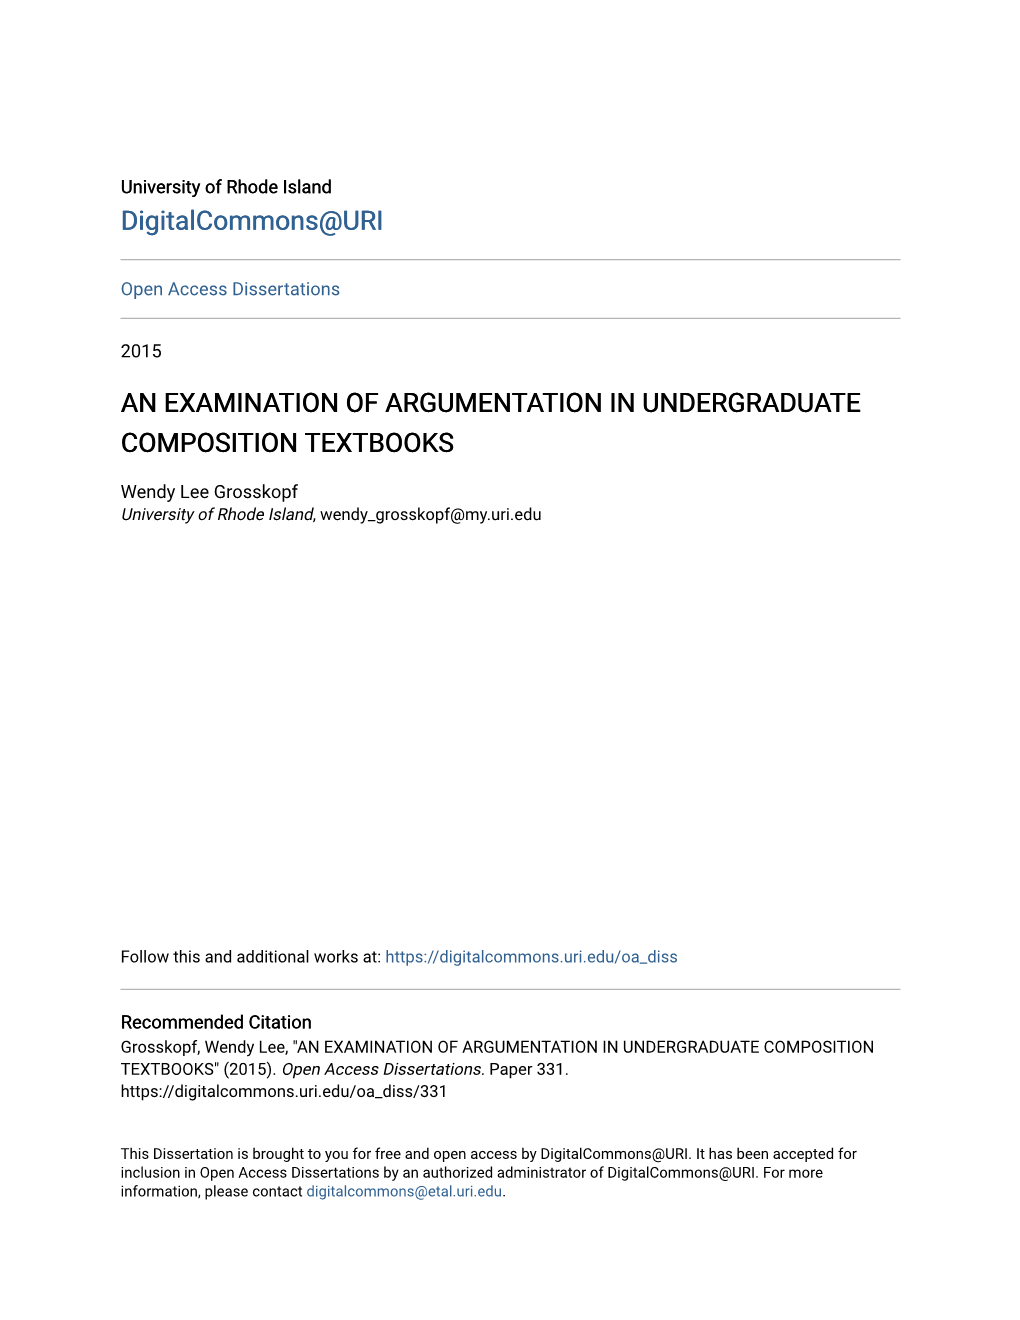 An Examination of Argumentation in Undergraduate Composition Textbooks